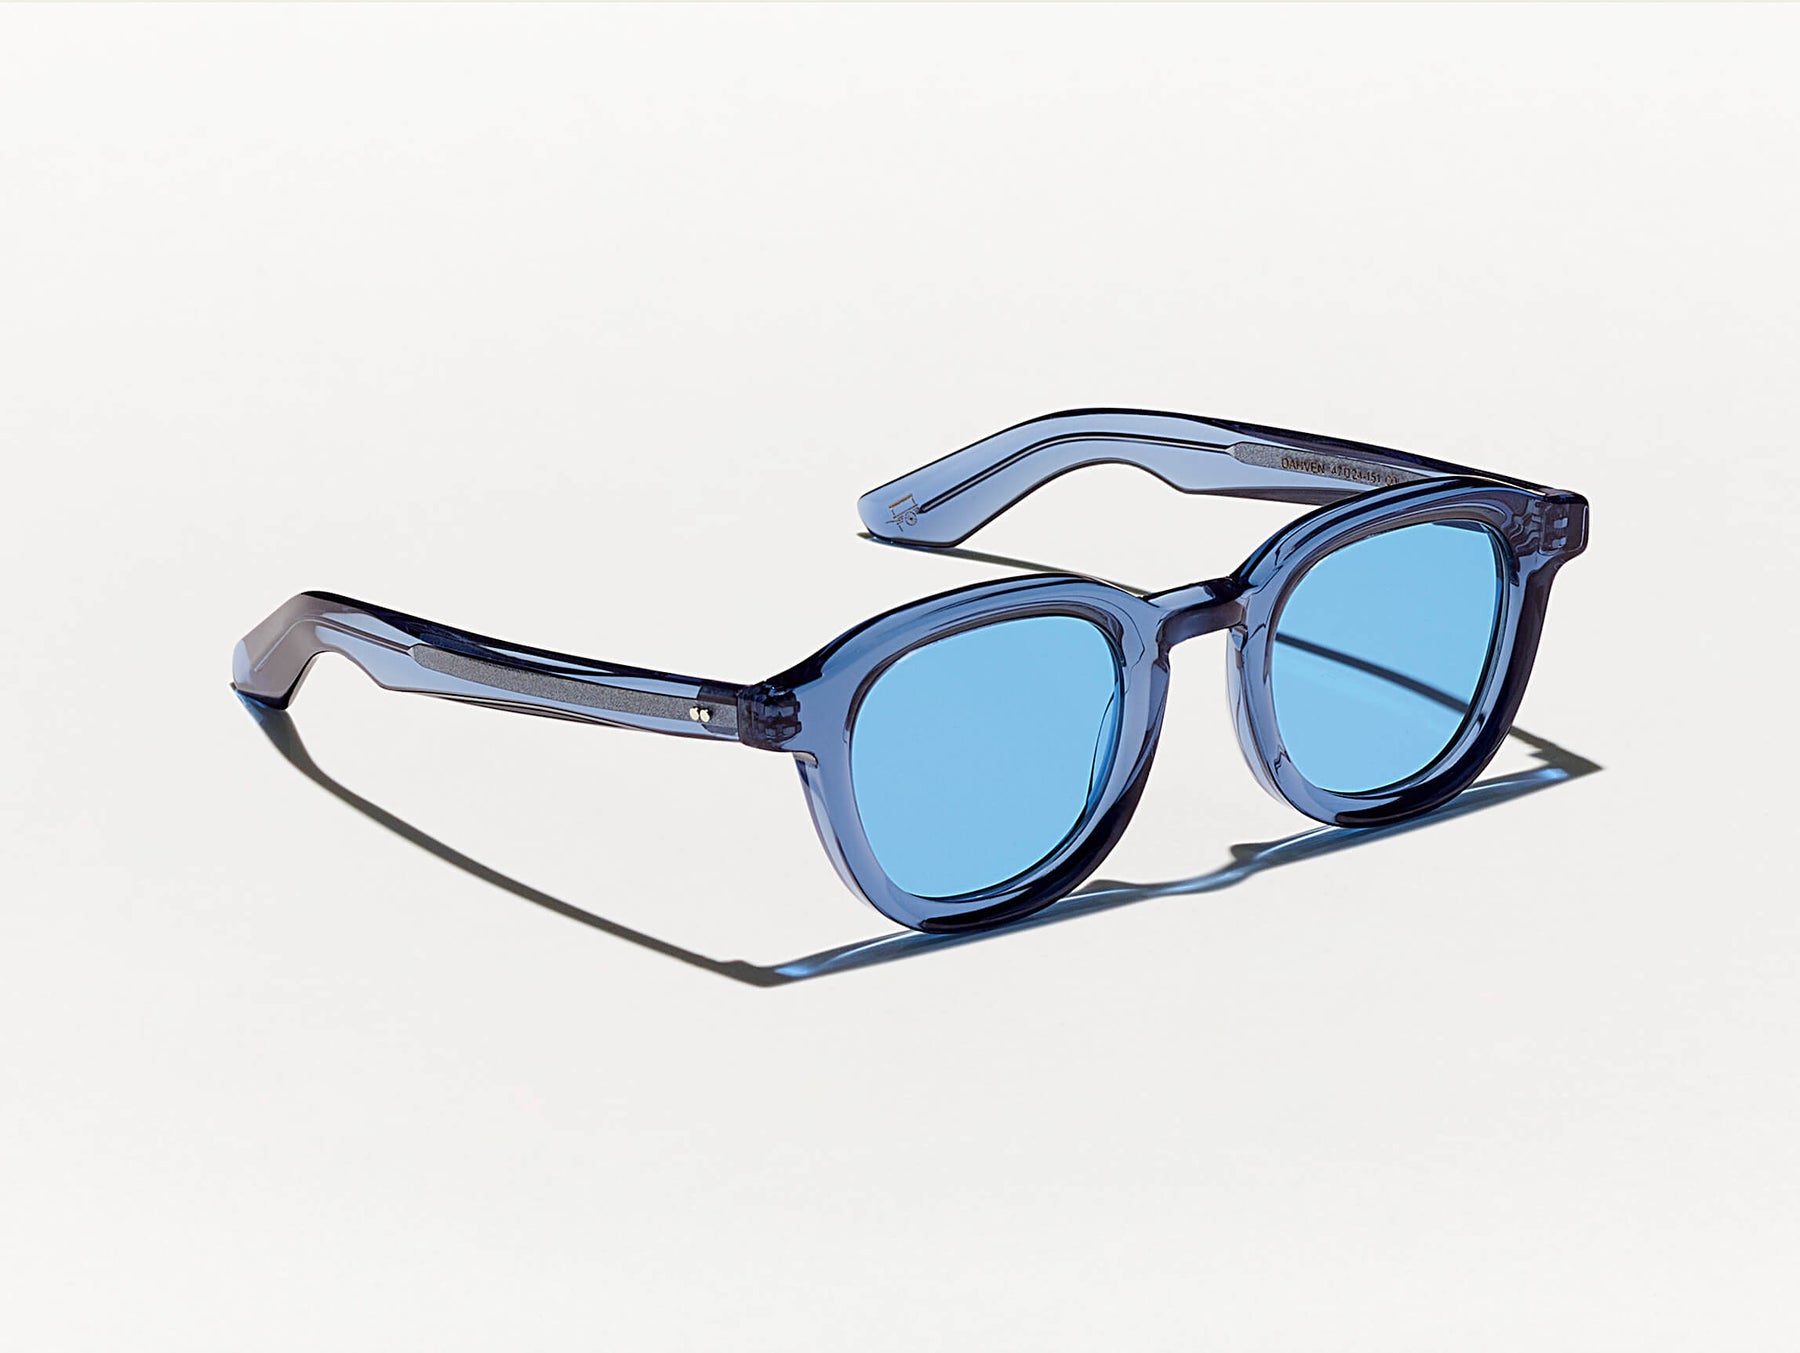 The DAHVEN SUN in Sapphire with Celebrity Blue Tinted Lenses